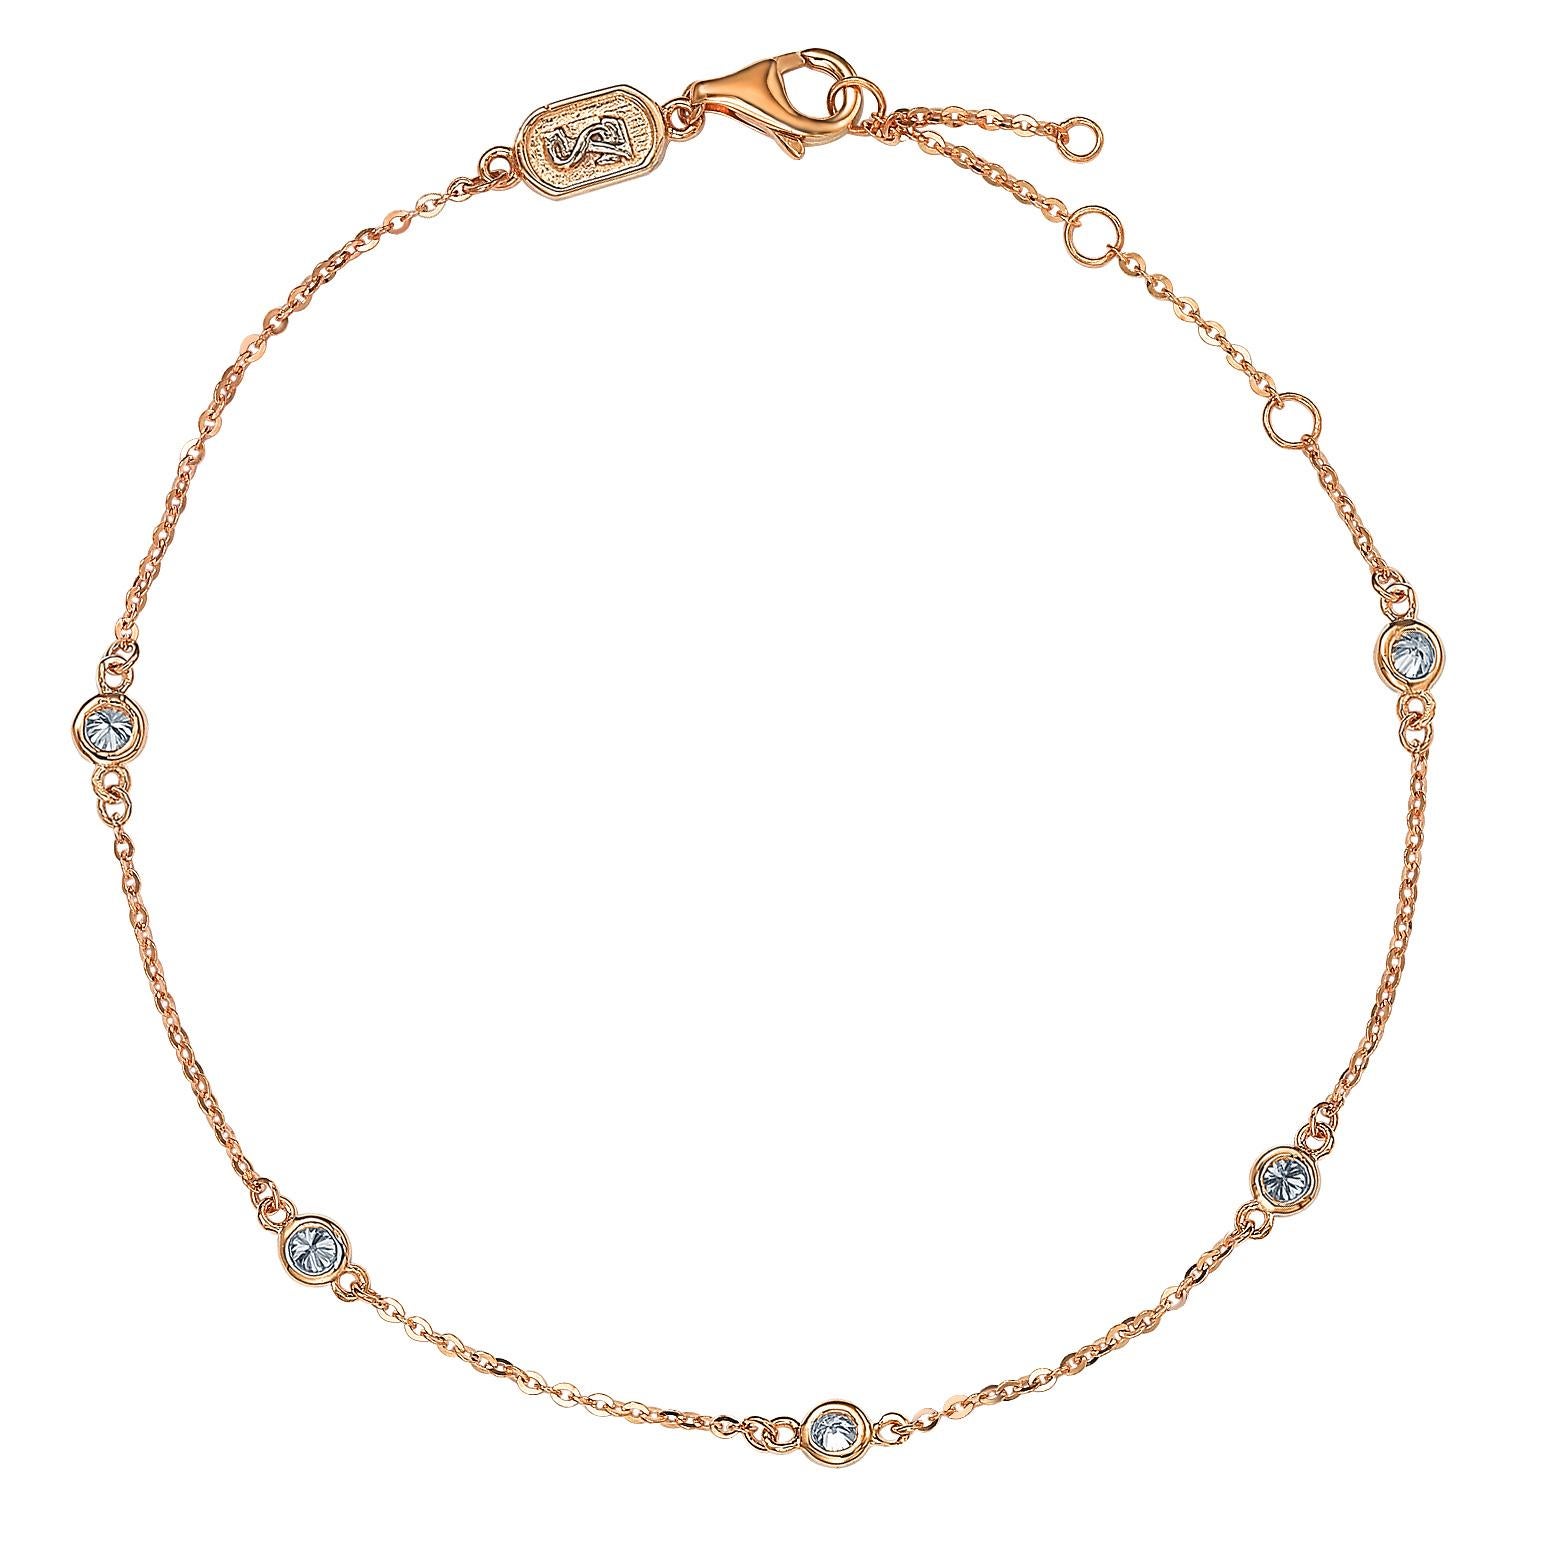 This elegant bracelet features a five round-cut diamonds on a thin 14 karat rose gold chain. A high polish finish completes the look.

White Diamonds
Diamonds: Five
Diamond cut: Round
Diamond weight: 1/4 carats
Color: G-H
Clarity: SI1-SI2
Setting: